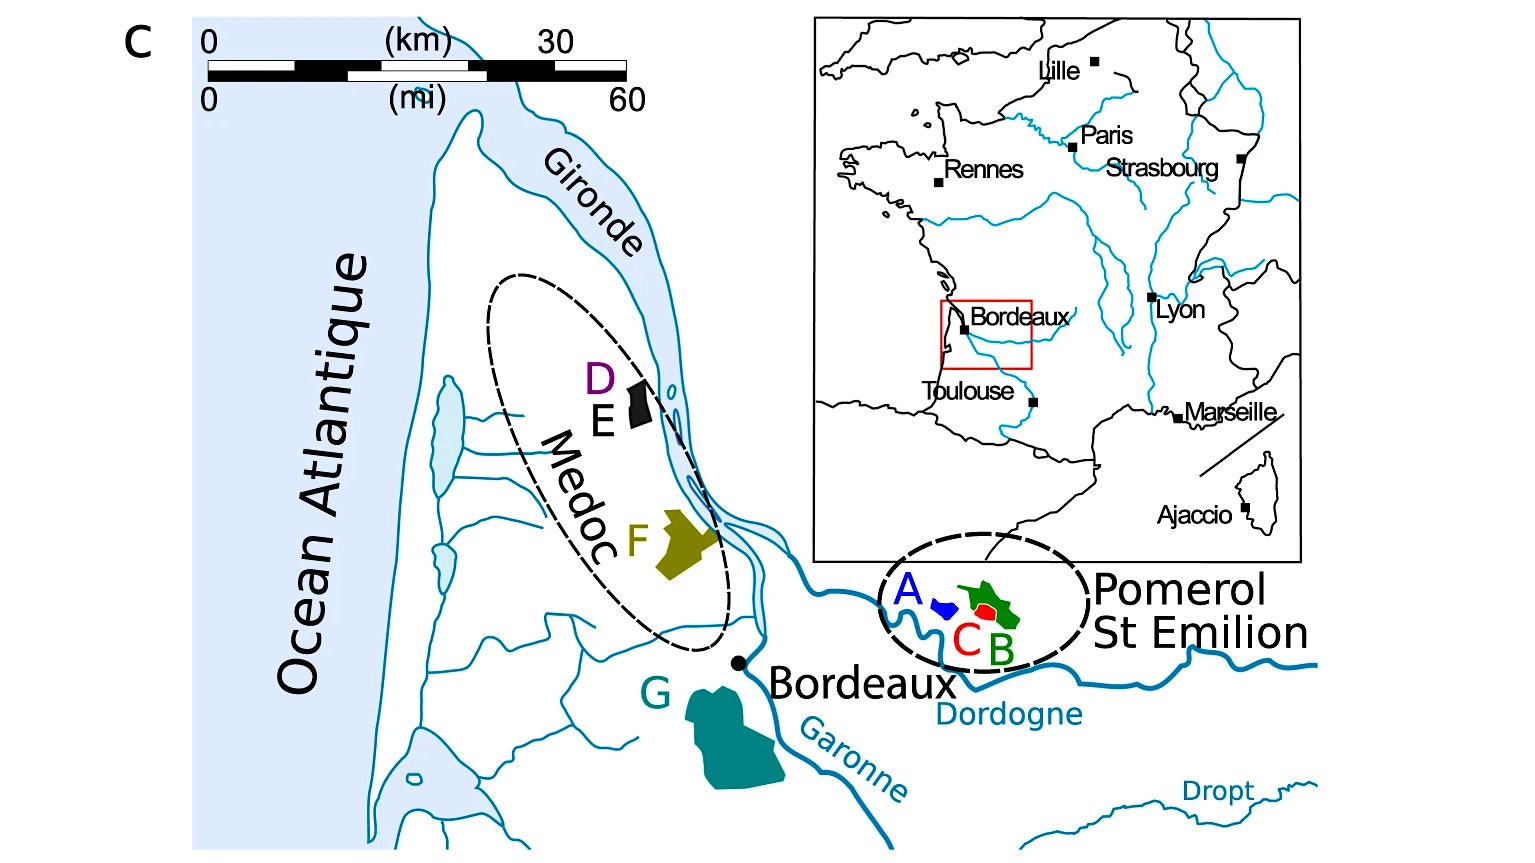  Map showing tested wines in Bordeaux.